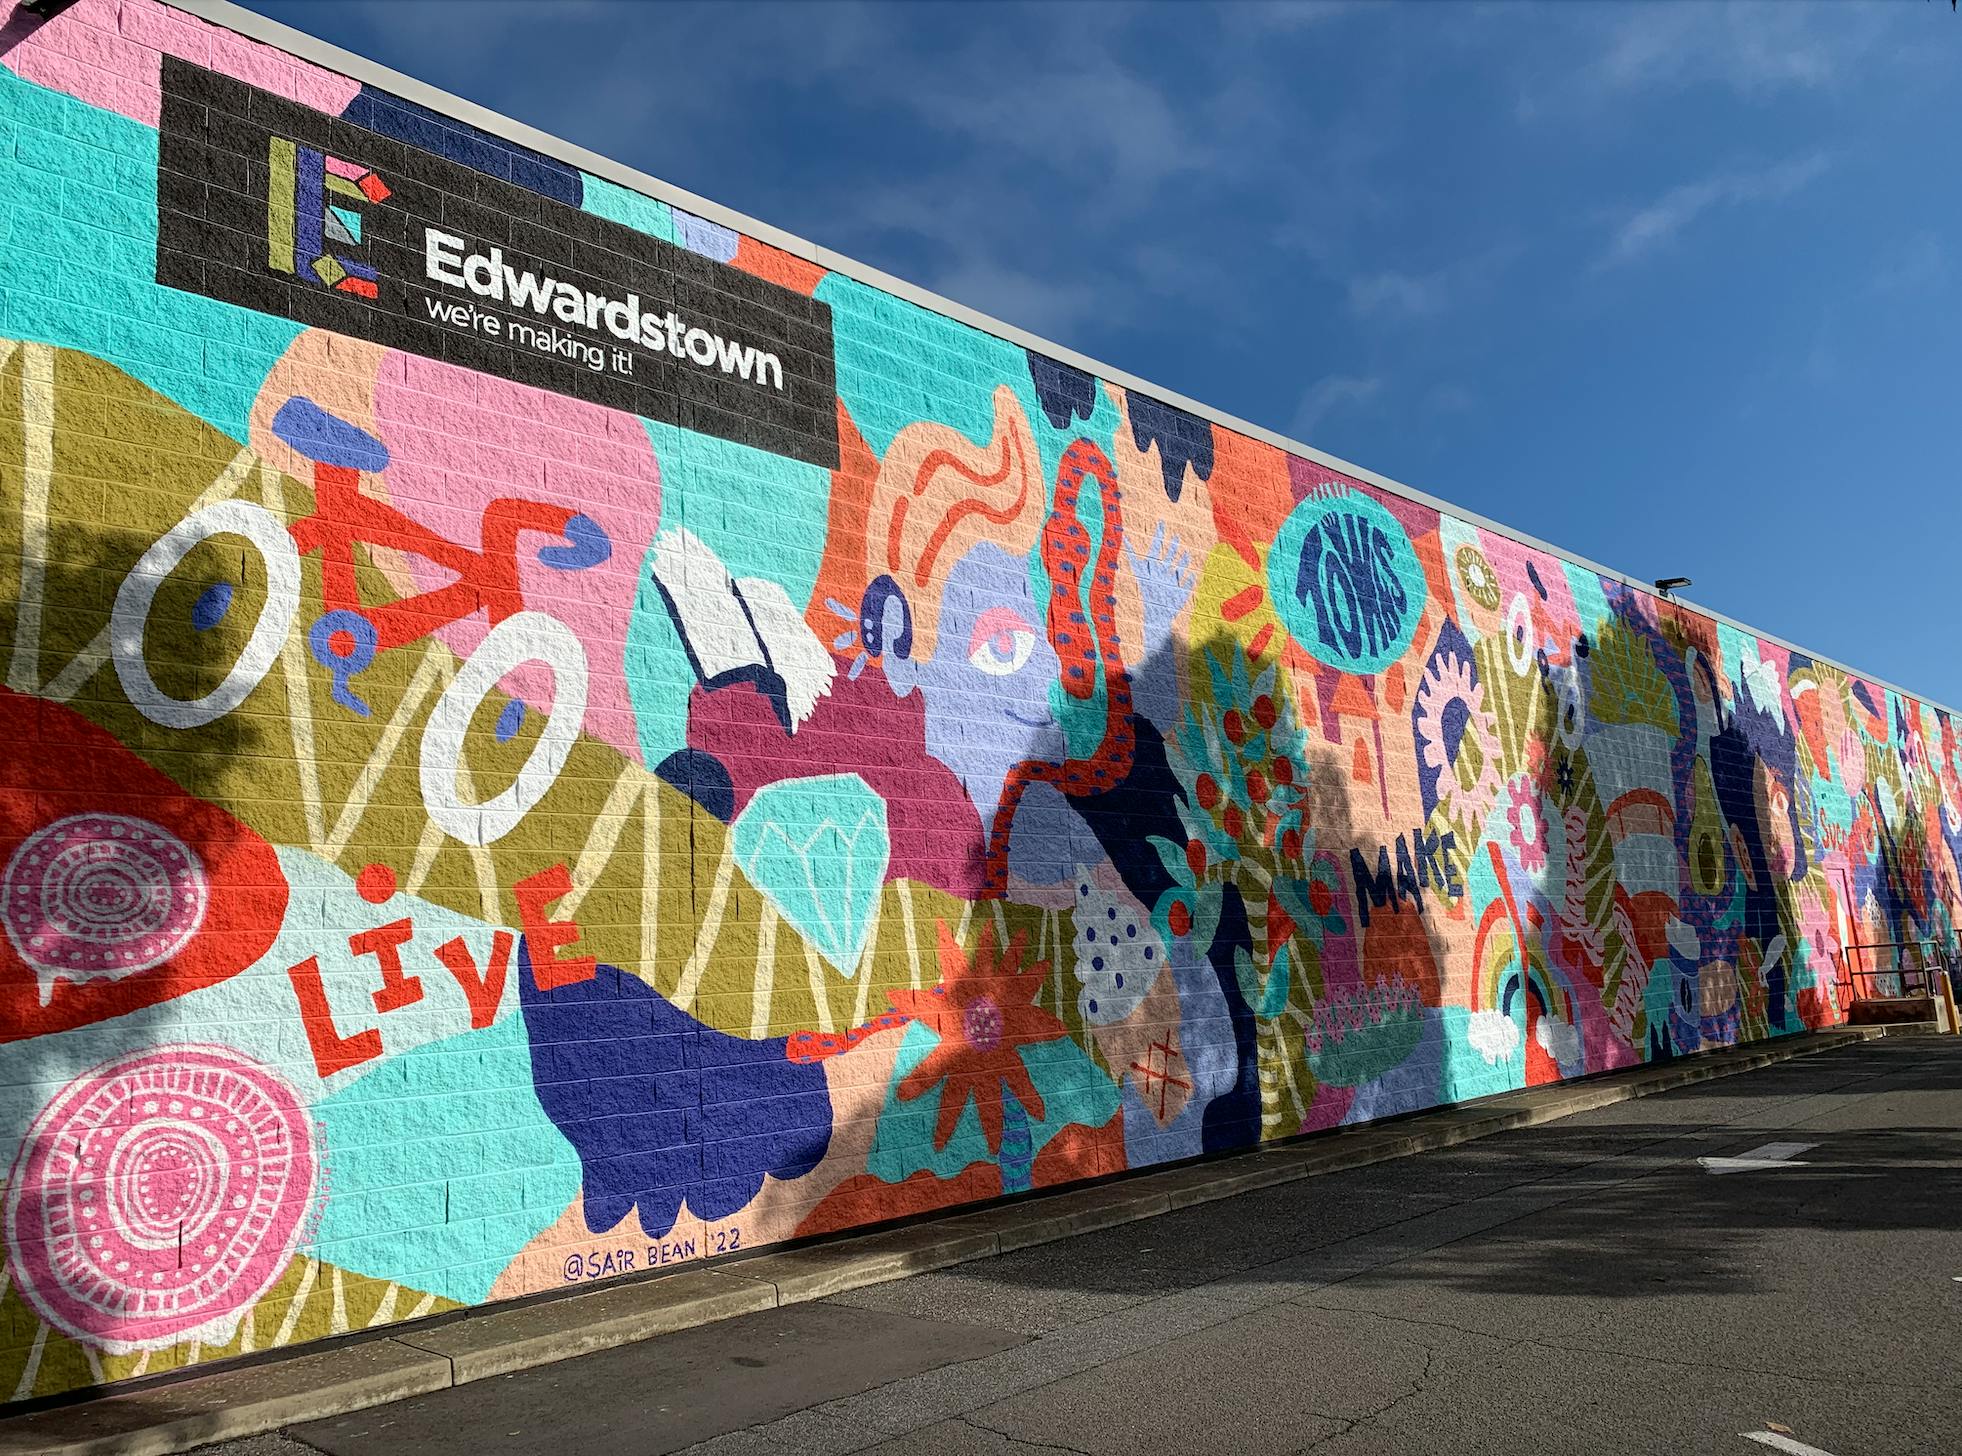 "Pieces of Edwardstown" mural by Sair Bean 2022. Castle Plaza, Raglan Avenue, Edwardstown. Image credit: Sair Bean. Commissioned by City of Marion